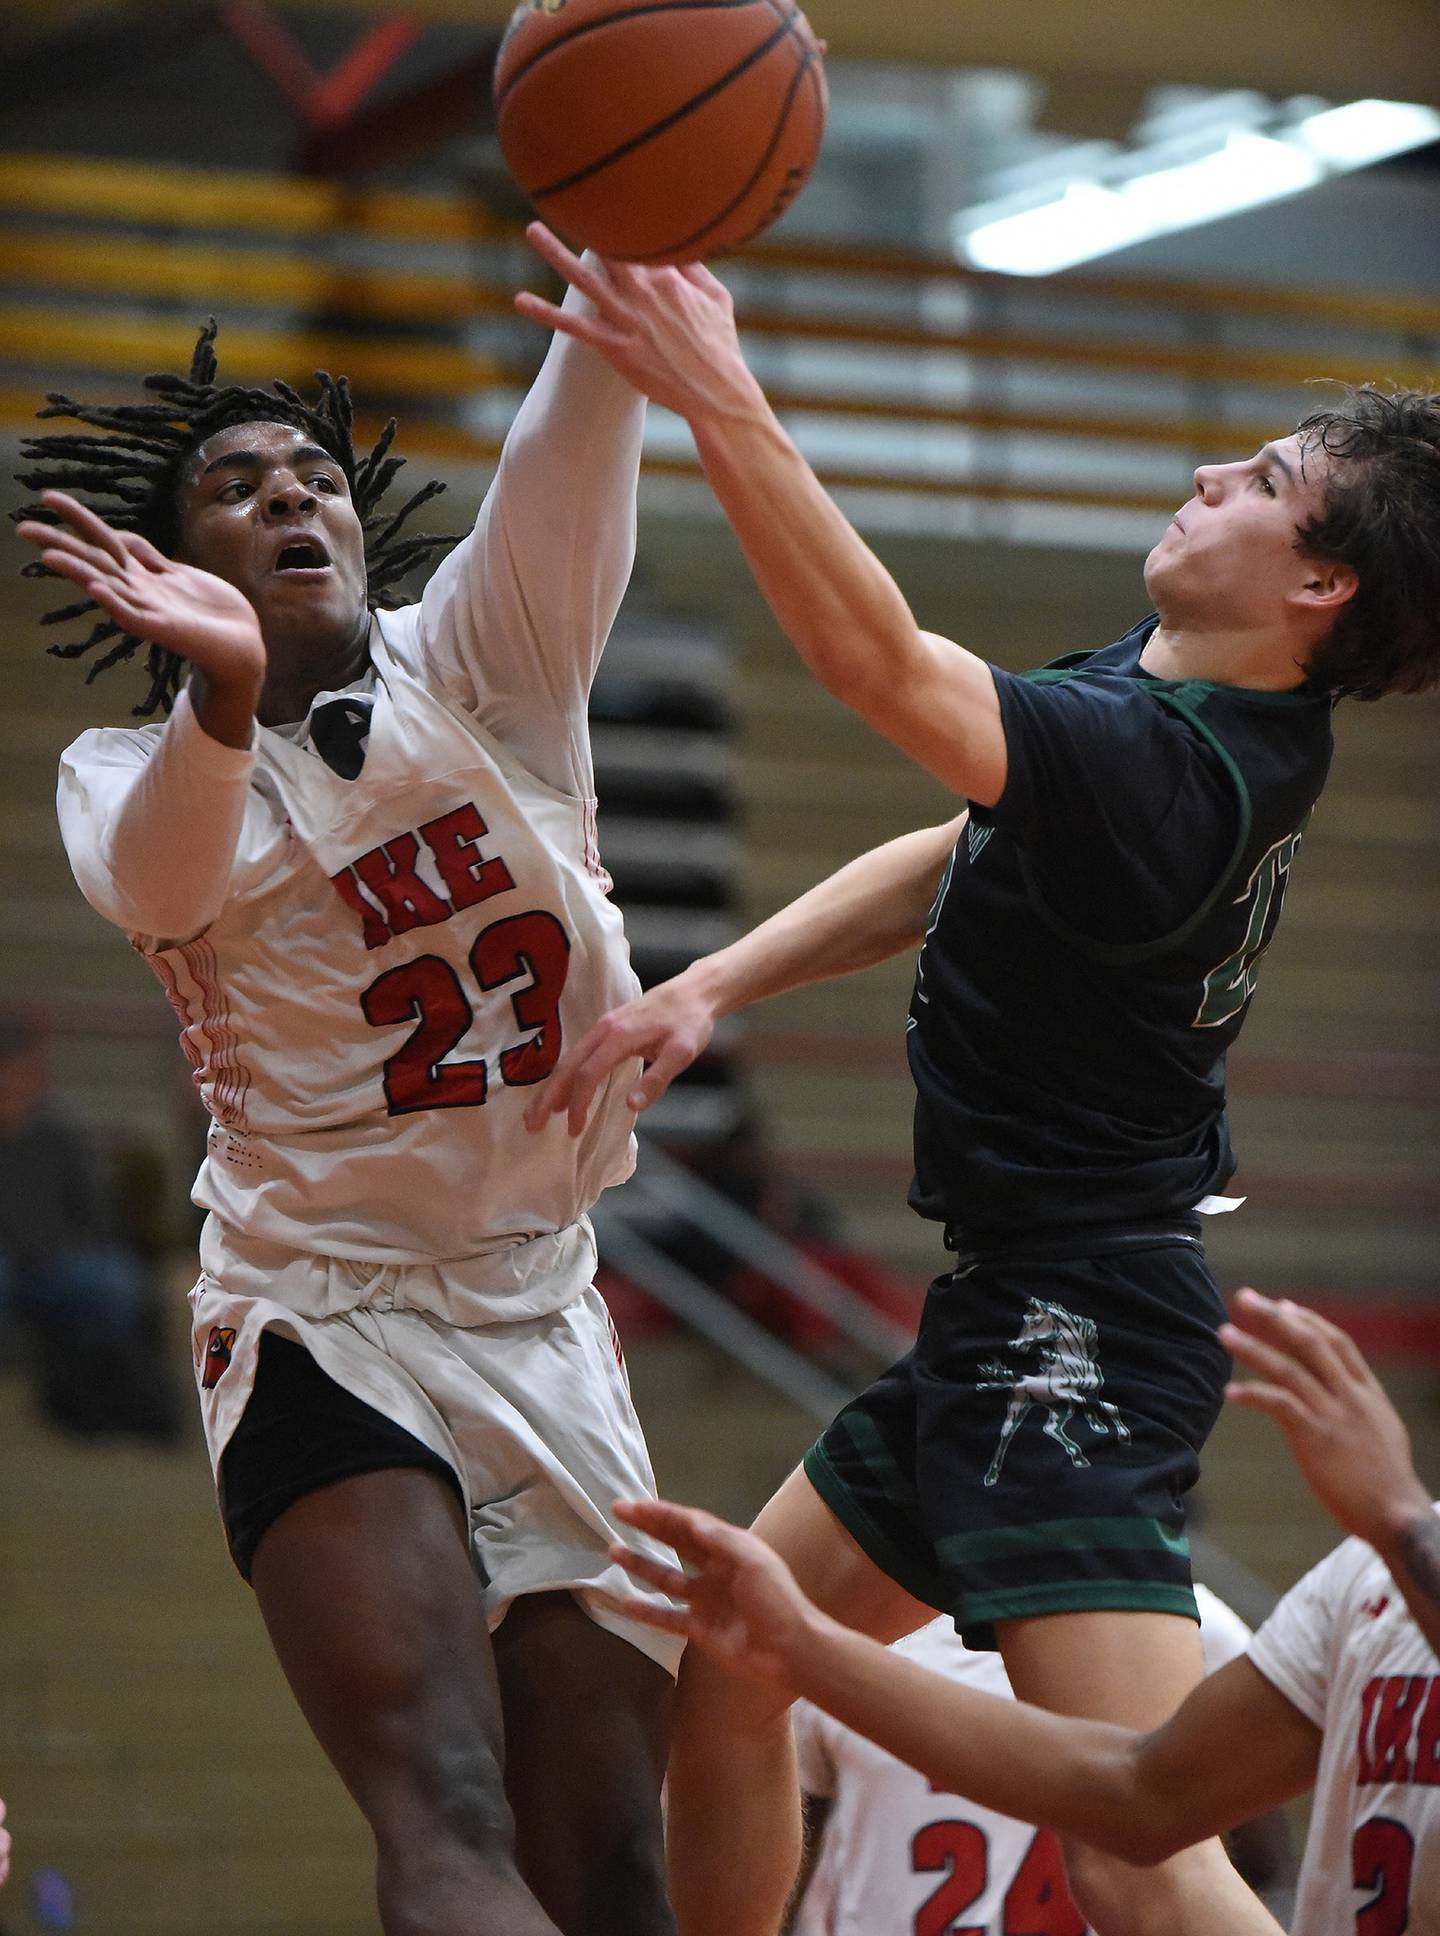 Evergreen Park's Nolan Sexton (22) tries to get a shot past Eisenhower's Romell Benford (23) during a South Suburban Red game in Blue Island on Tuesday, Dec. 13, 2022.